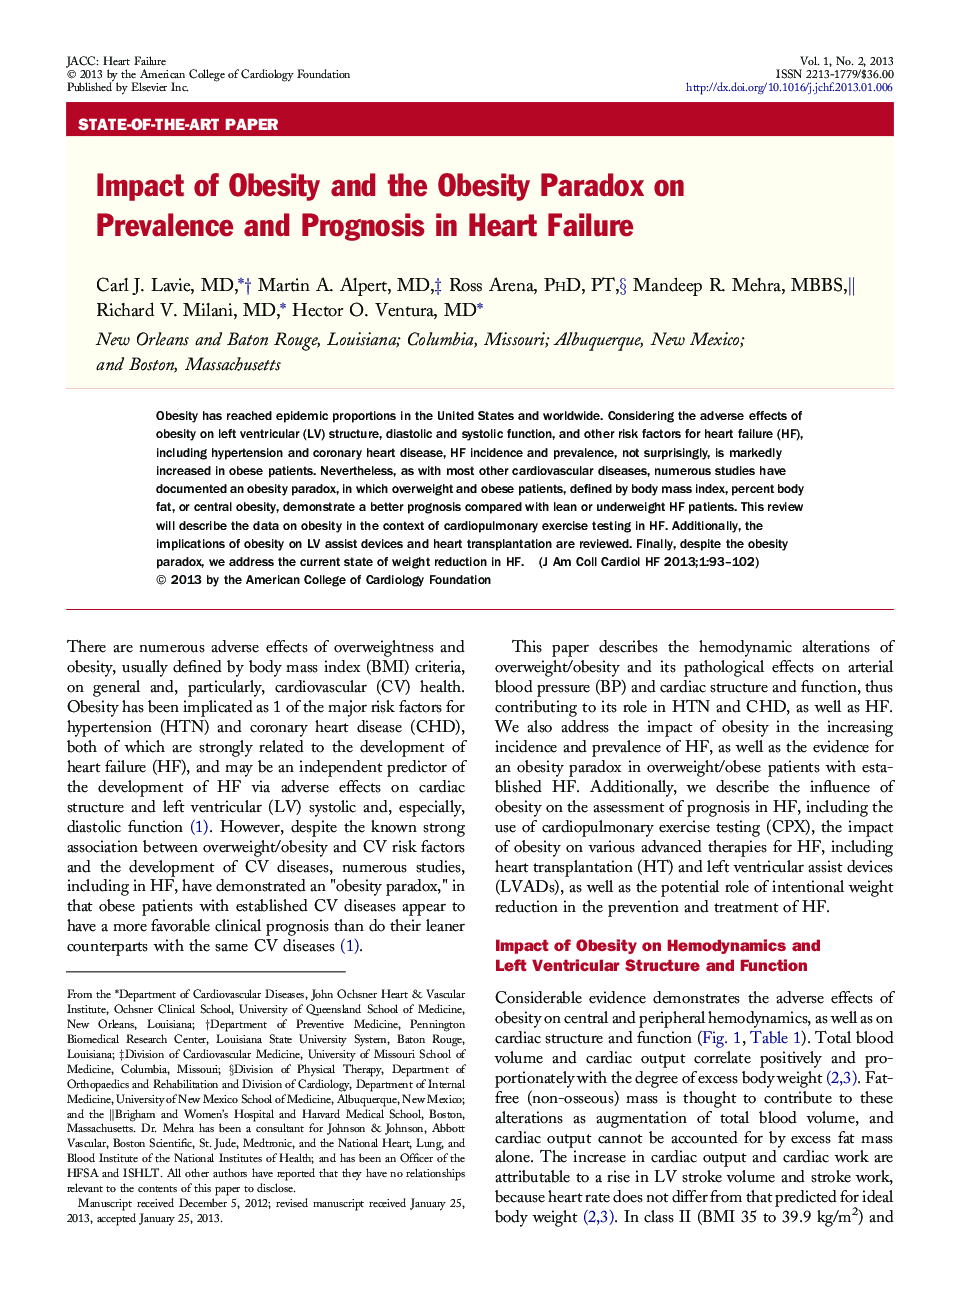 Impact of Obesity and the Obesity Paradox on Prevalence and Prognosis in Heart Failure 